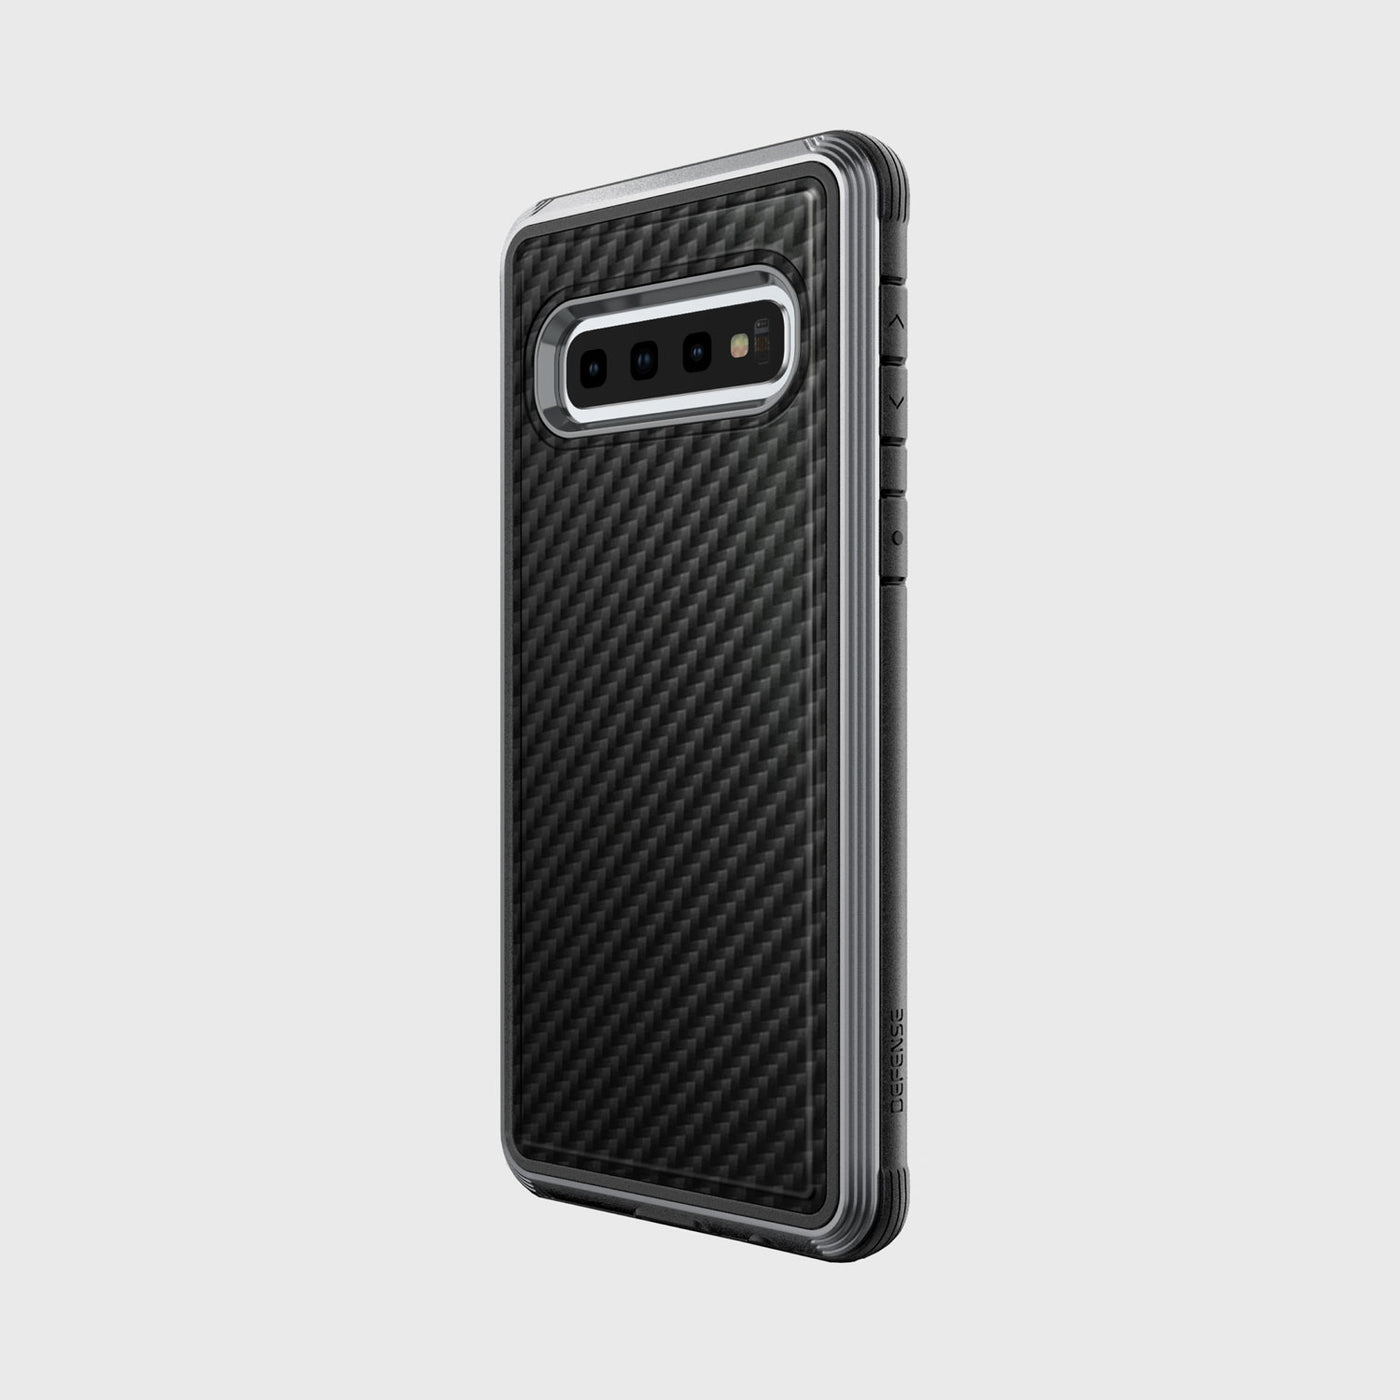 Luxurious Case for Samsung Galaxy S10 Plus. Raptic Lux in black carbon fiber.